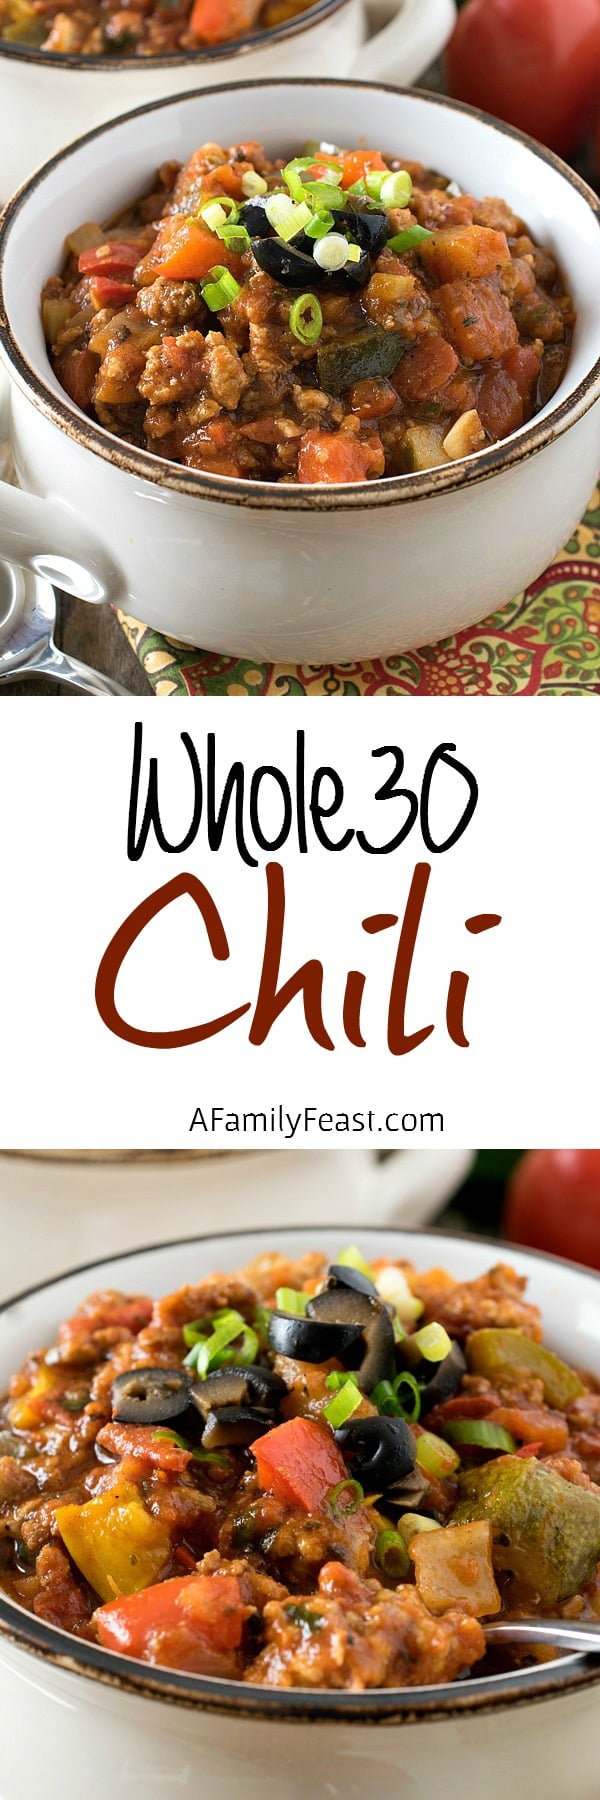 Whole30 Chili - An easy and delicious chili that anyone will love. All ingredients are Whole30 compliant.